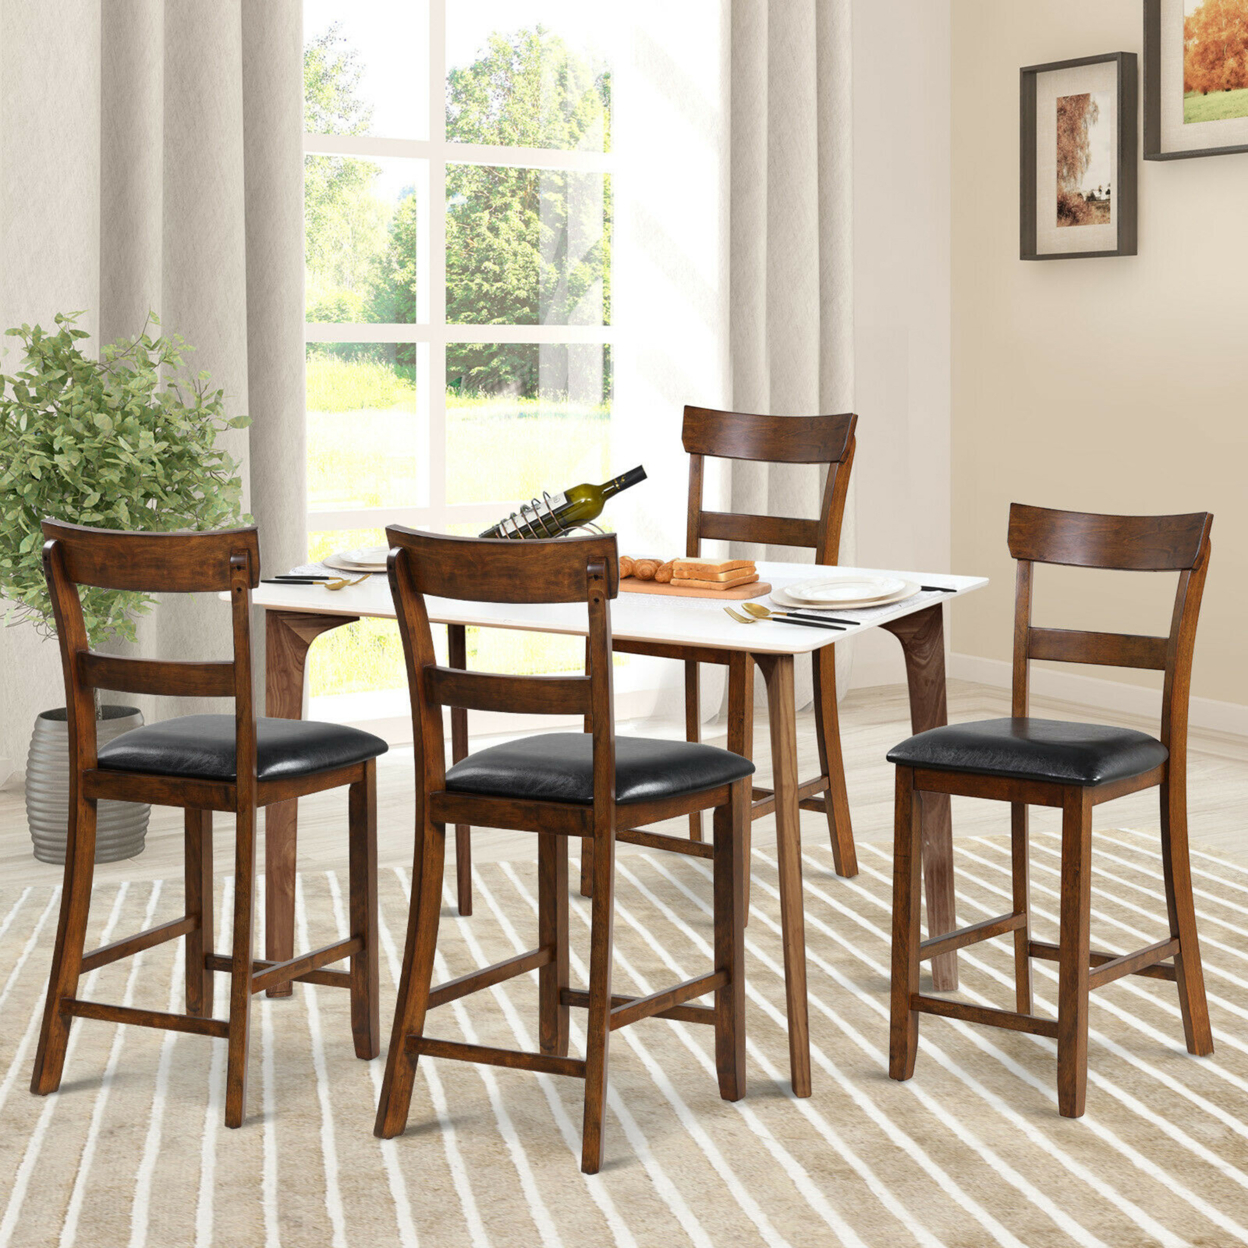 Set Of 4 Barstools Counter Height Chairs W/Leather Seat & Rubber Wood Legs